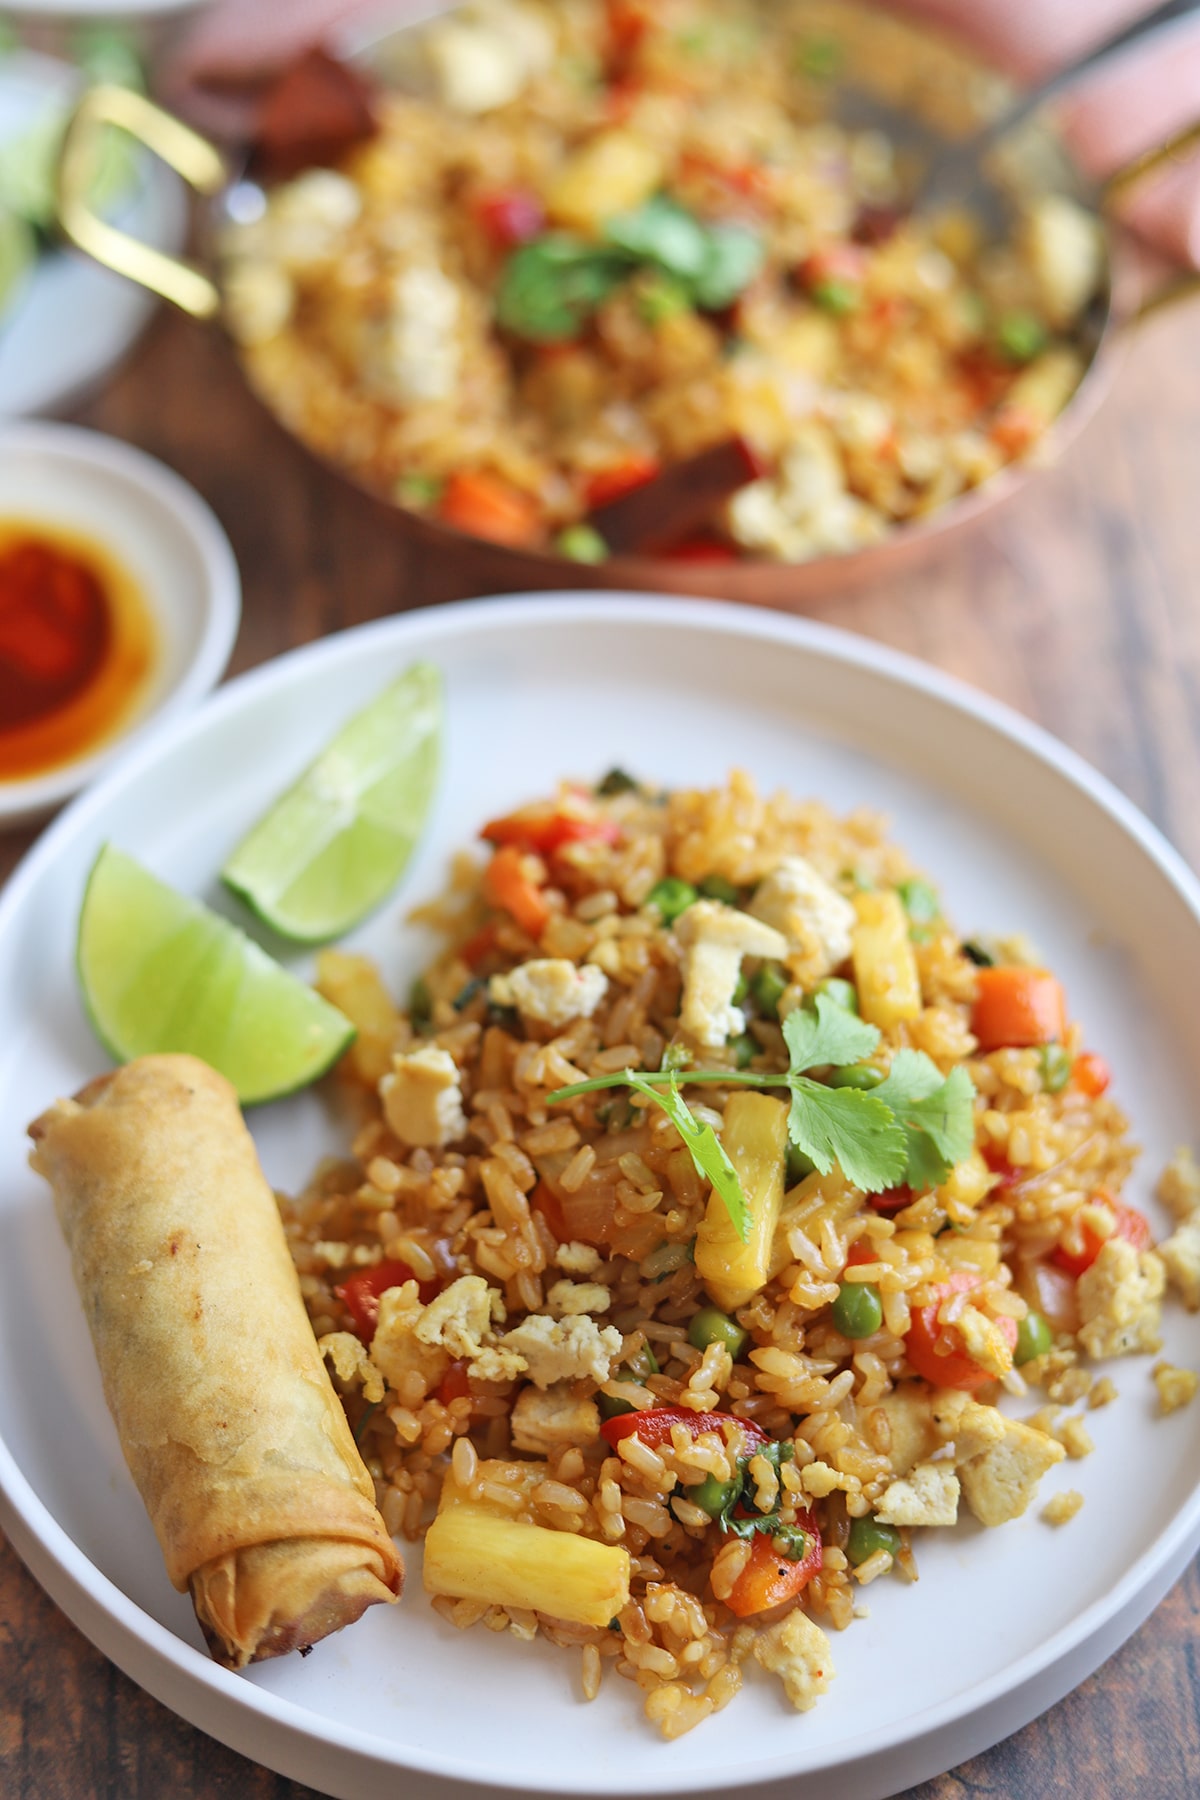 Plate with pineapple fried rice, spring roll, and lime wedges.